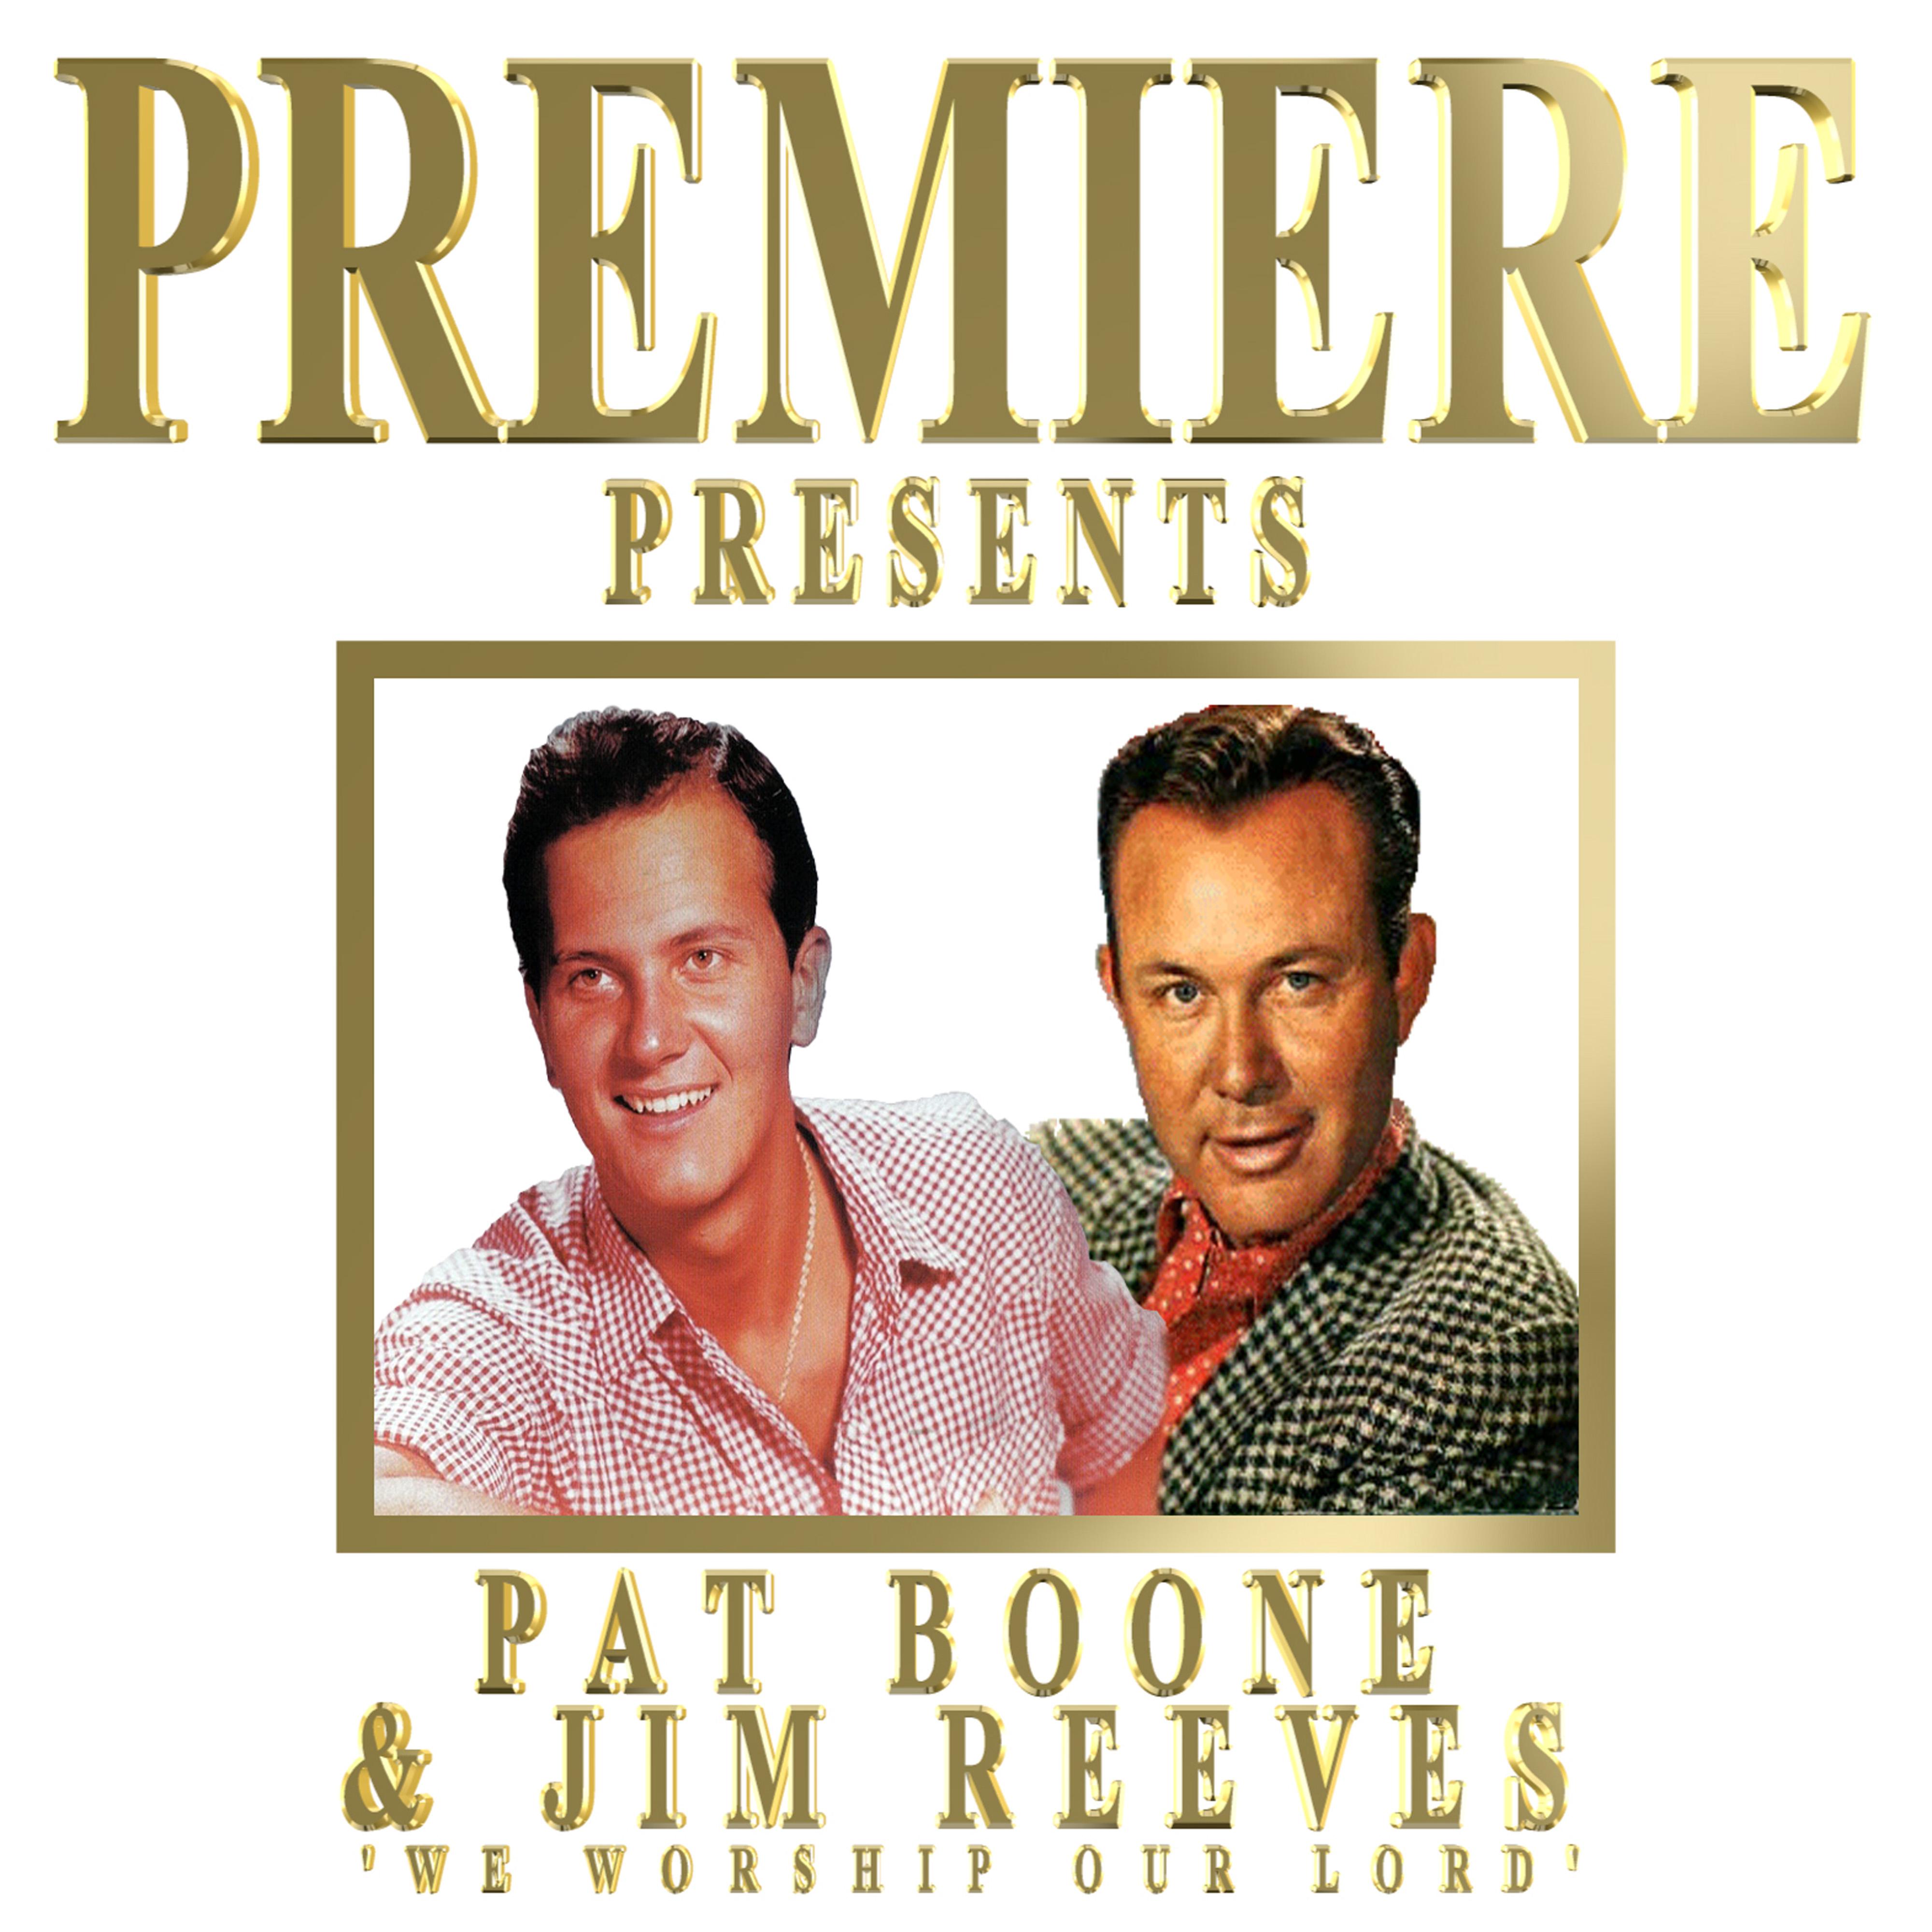 Premiere Presents Pat Boone & Jim Reeves (We Worship Our Lord)